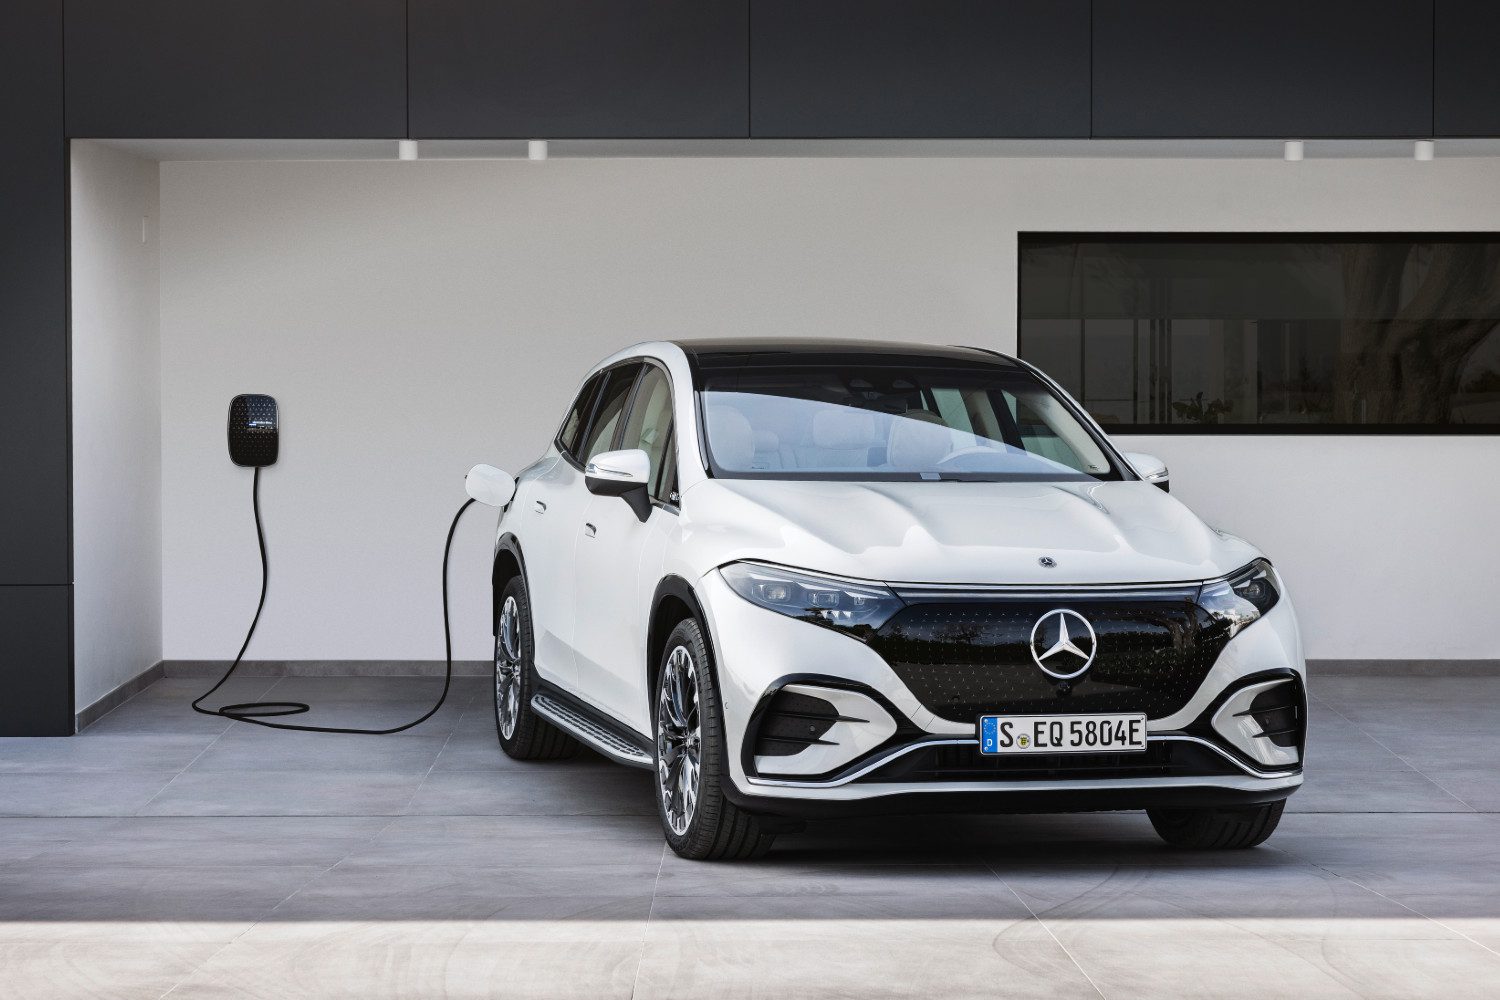 The EQS is the first high-end luxury SUV in the Mercedes EQ electric family offering  